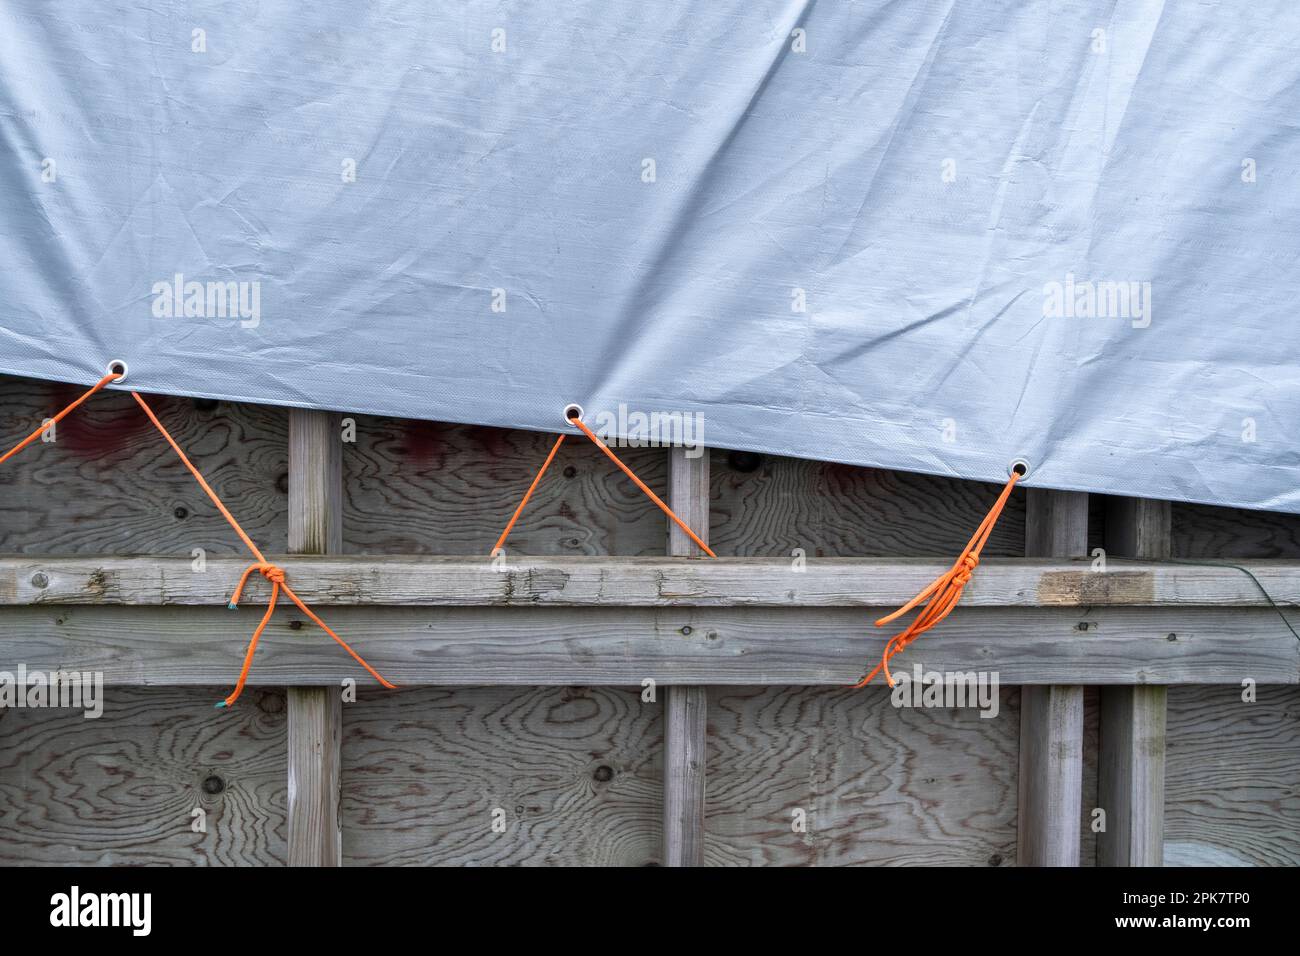 A tarpaulin tied to a wooden crate Stock Photo